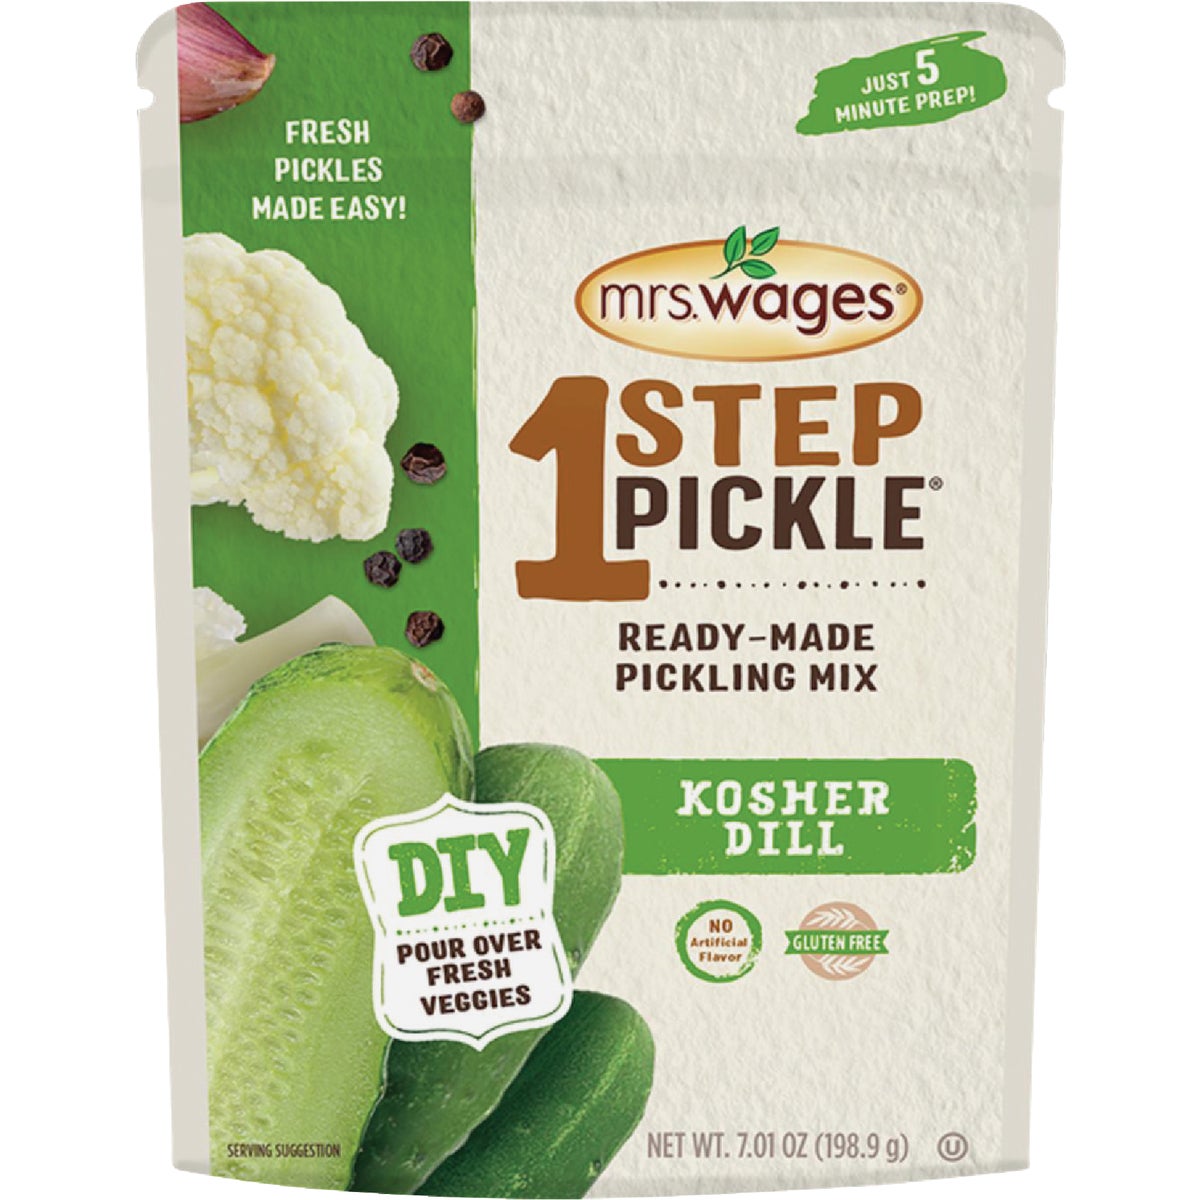 Item 608853, Everyone can be a pro at canning, with our 1 Step Pickle Ready-Made 